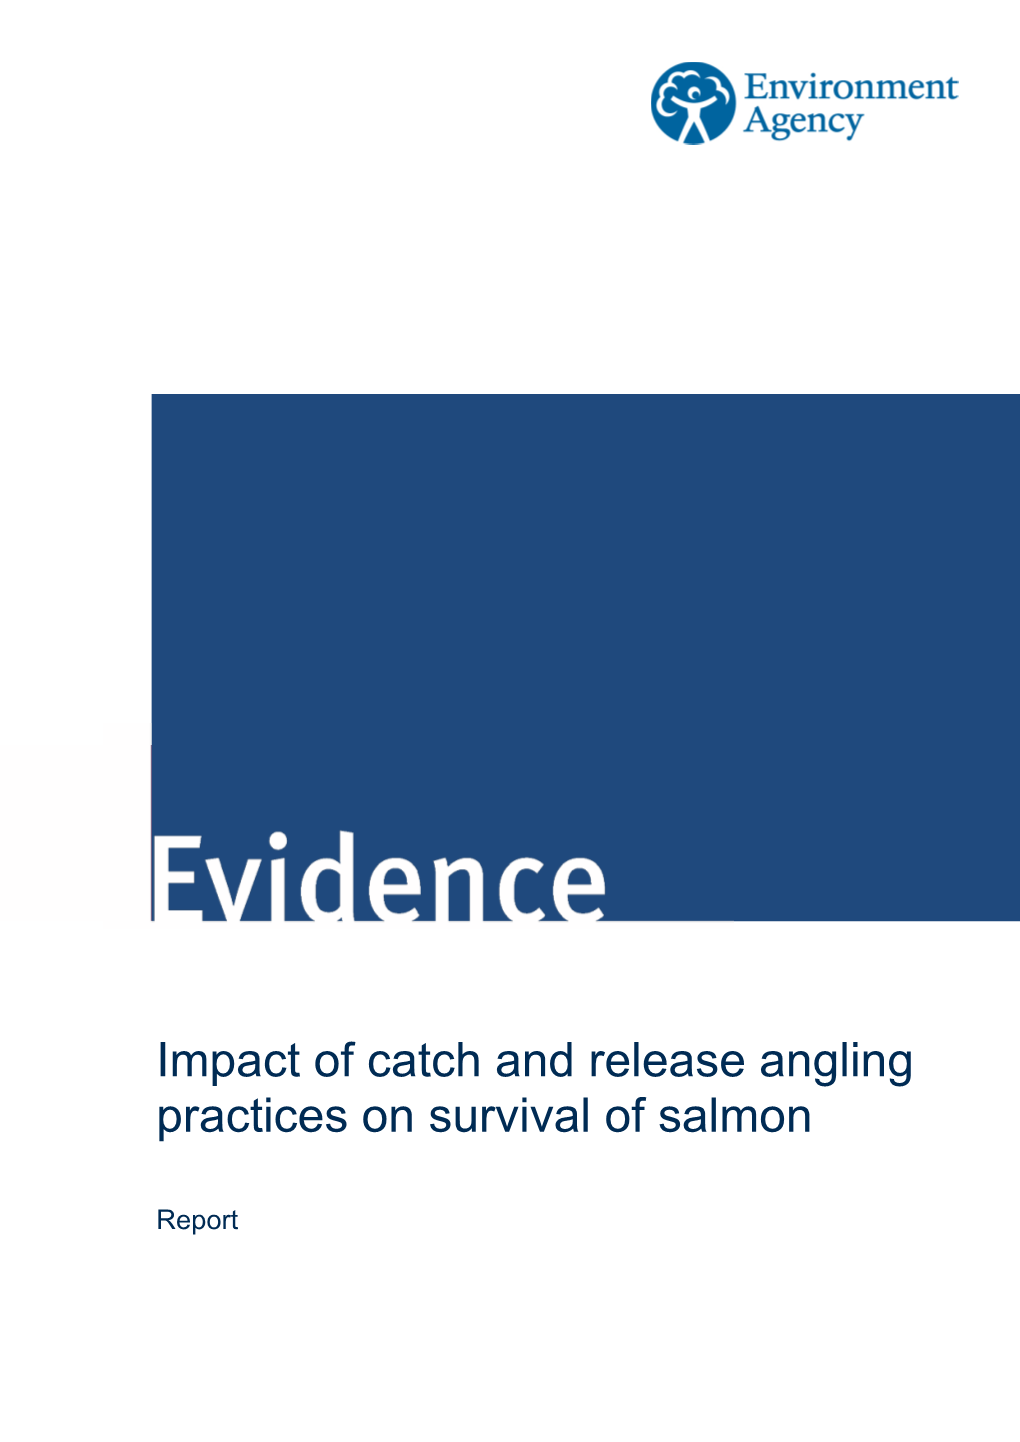 Impact of Catch and Release Angling Practices on Survival of Salmon